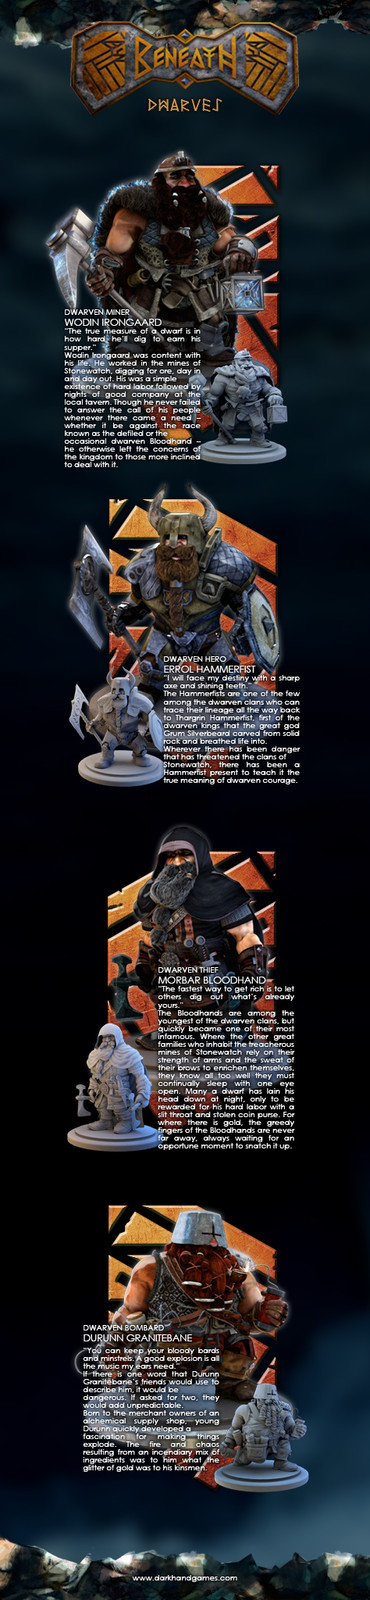 Dwarven characters